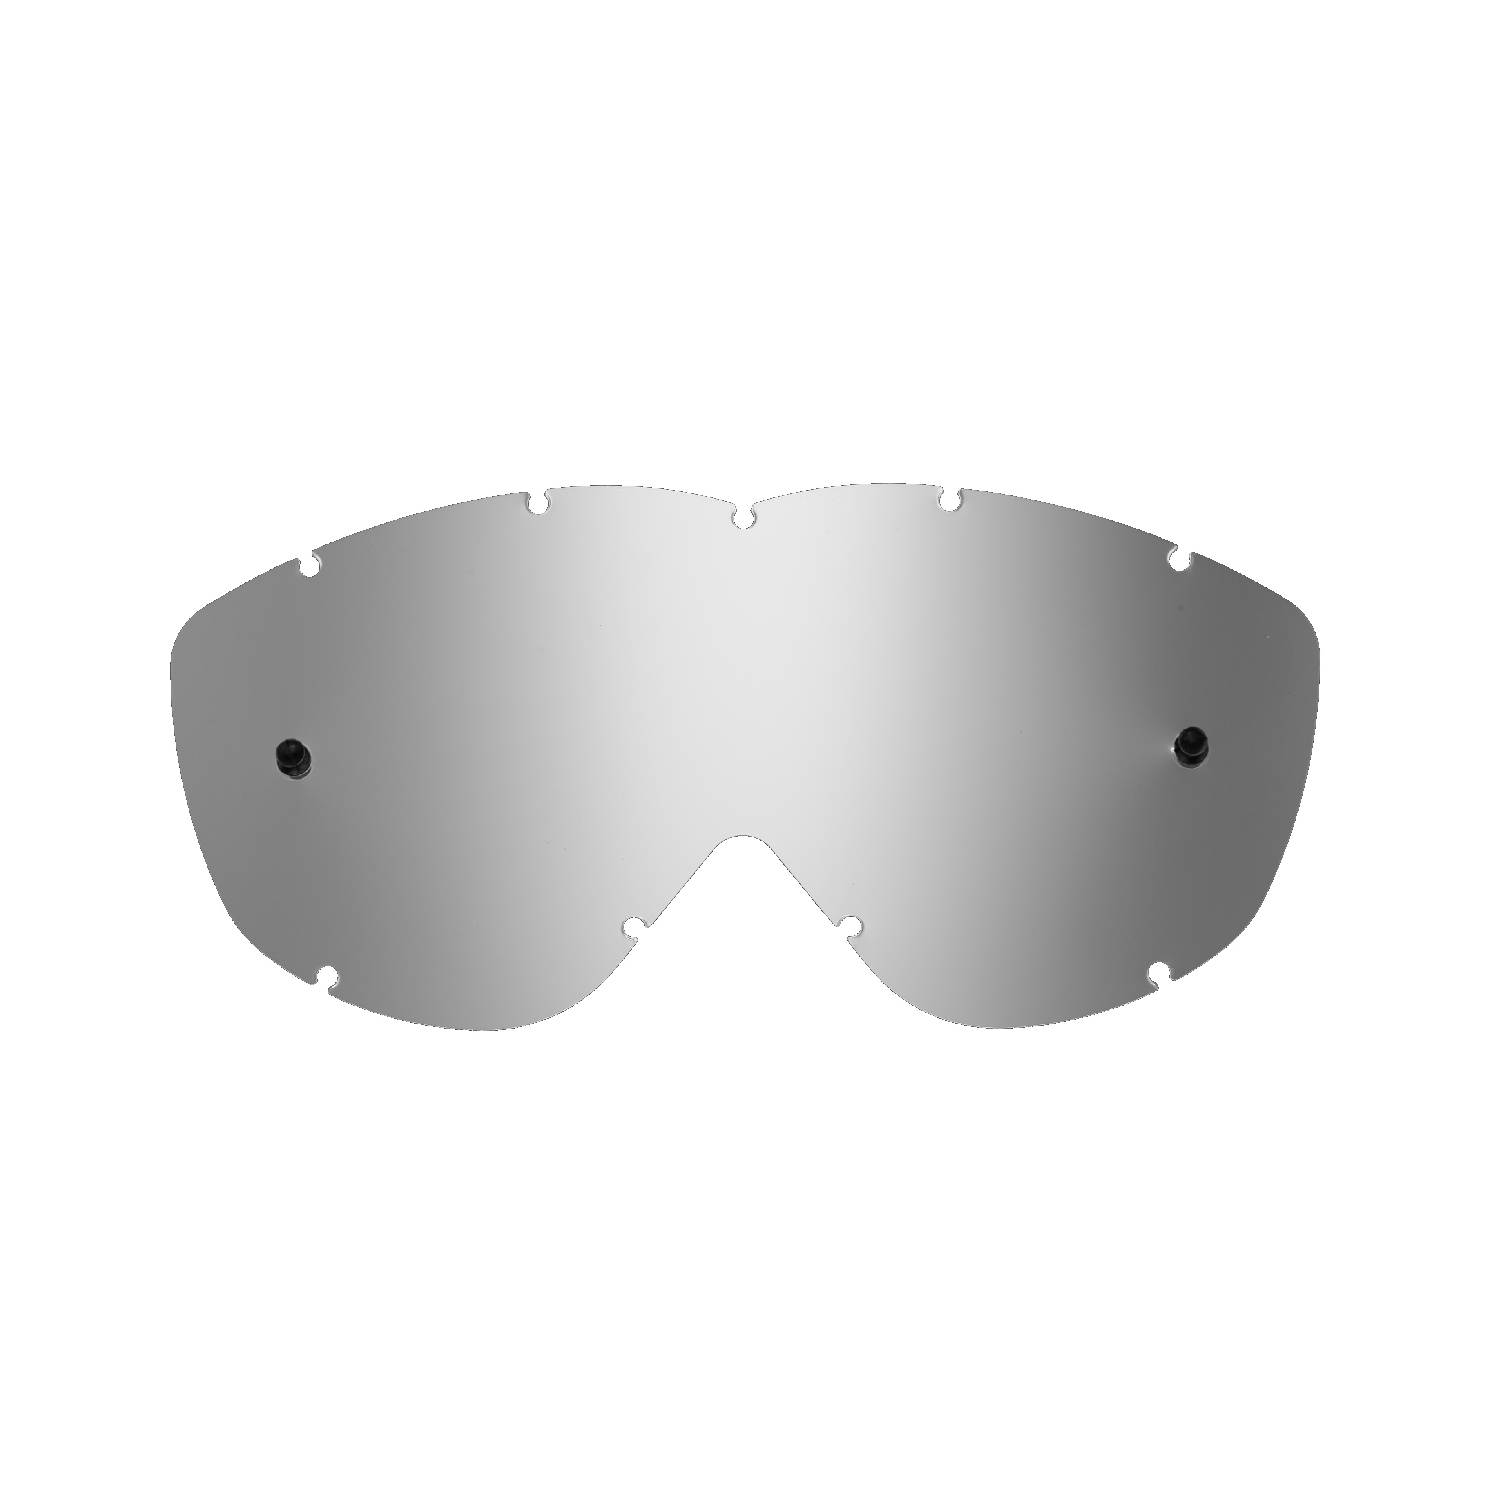 silver-toned mirrored replacement lenses for goggles compatible for Spy Alloy / Targa goggle